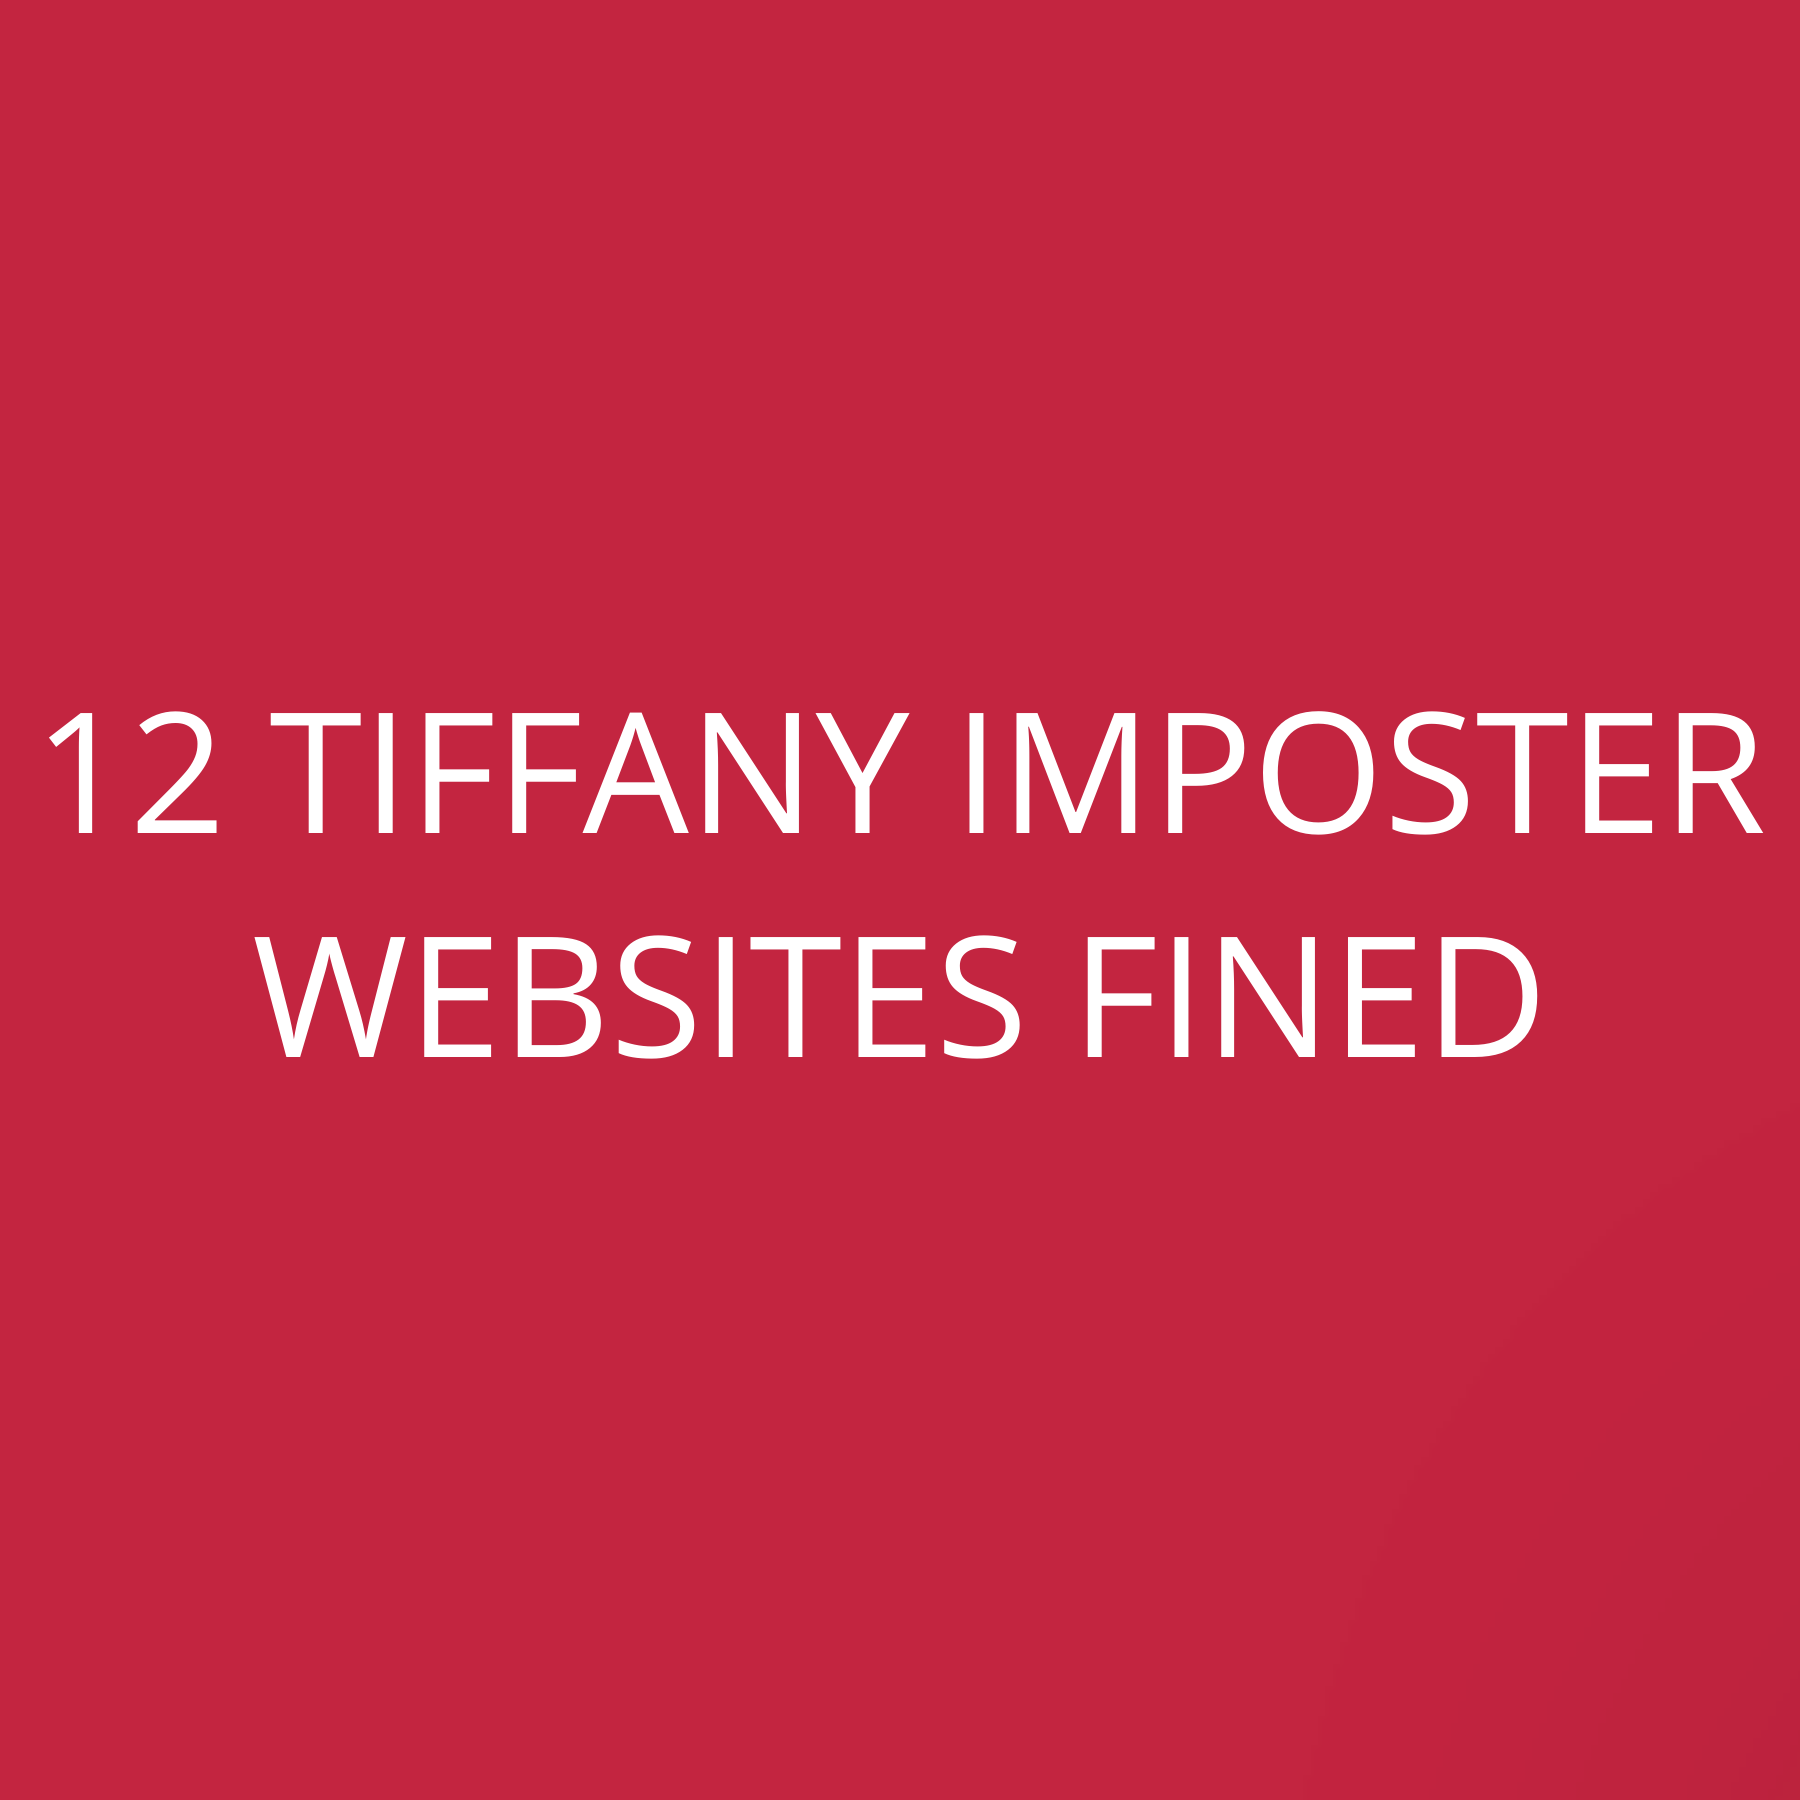 12 Tiffany imposter websites fined